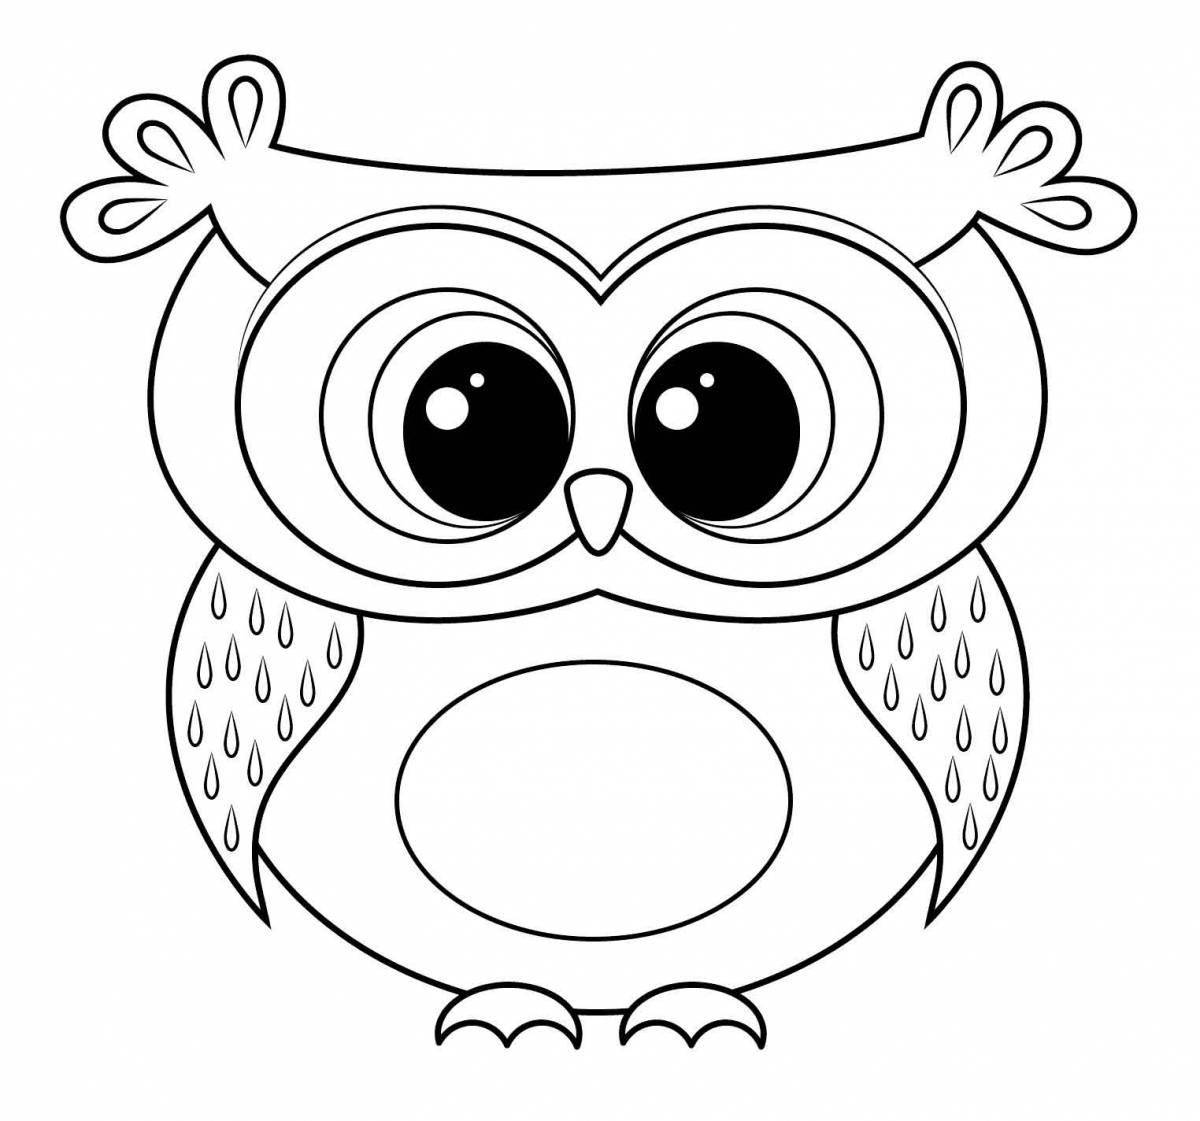 Coloring book fluffy owlet